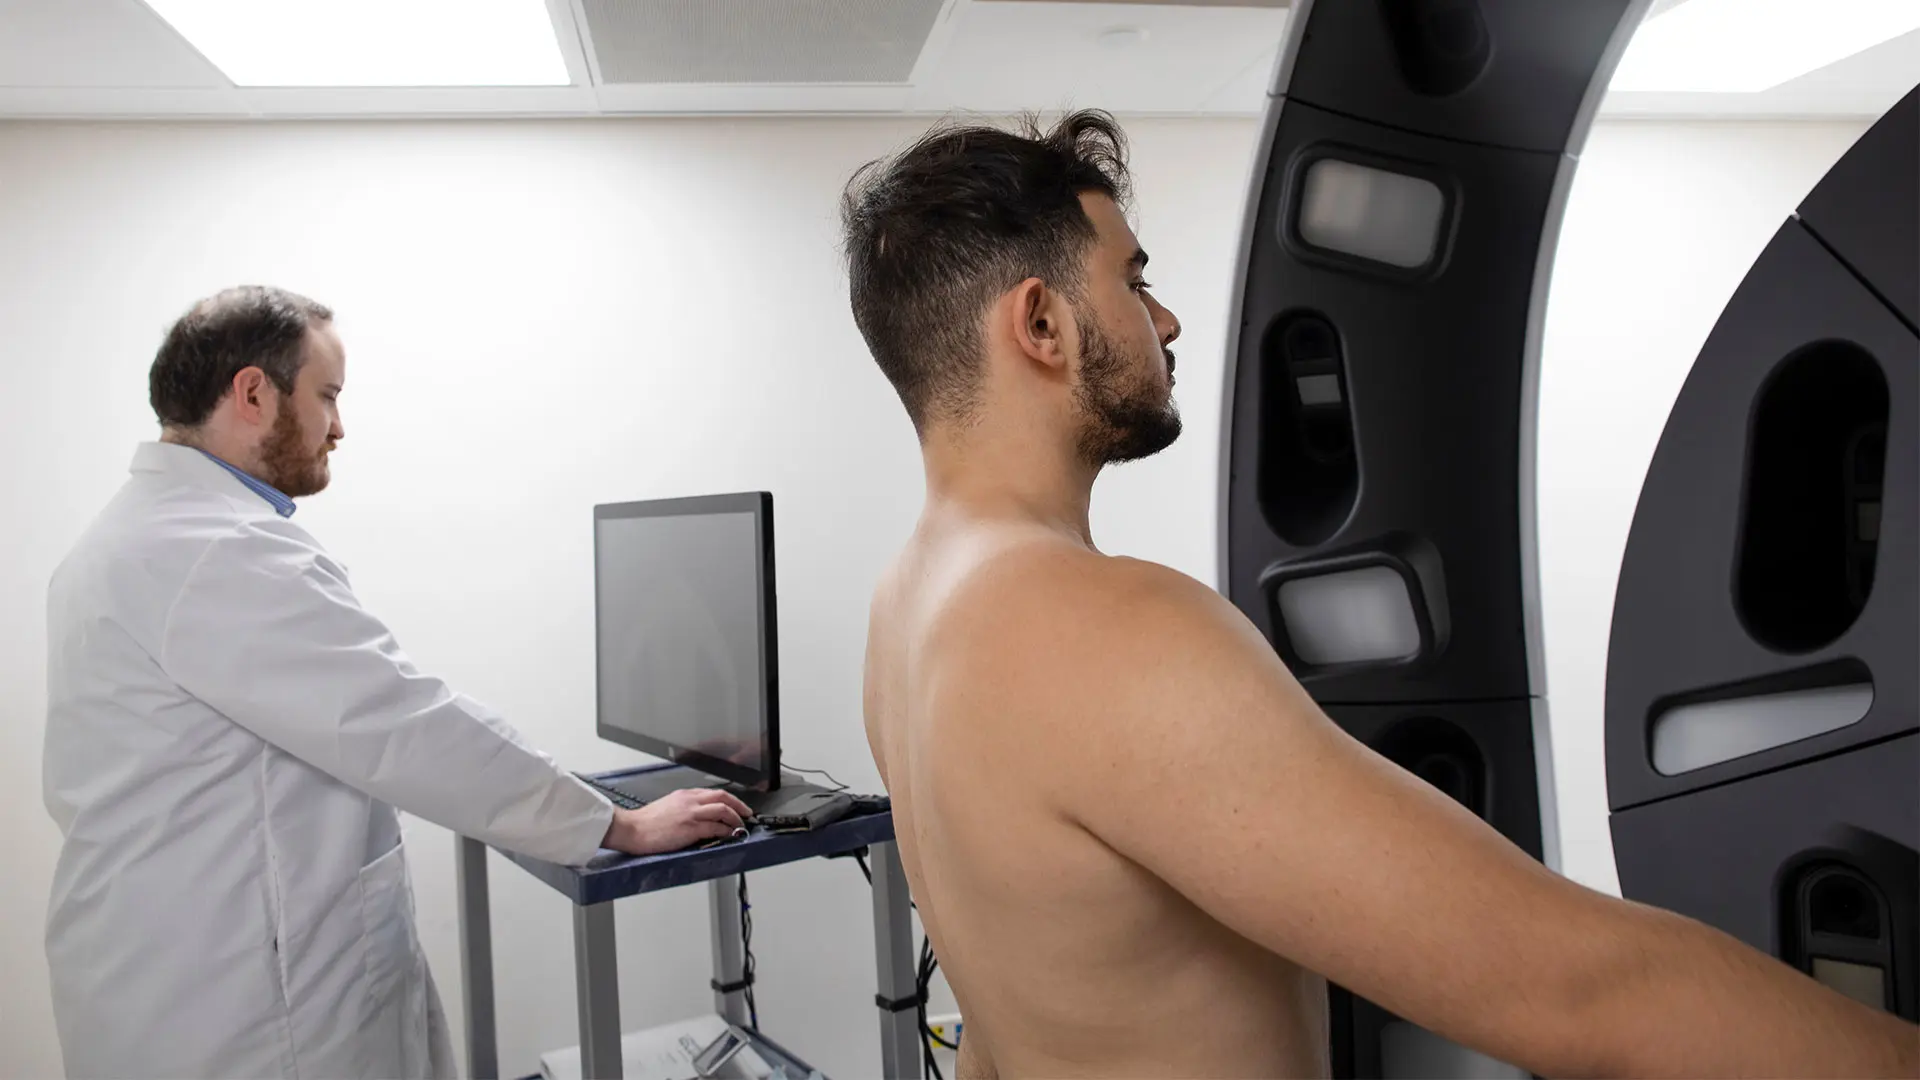 Jonathan Ungar, MD, uses the Vectra® system to deliver 360-degree full-body patient imaging at the Waldman Melanoma and Skin Cancer Center.